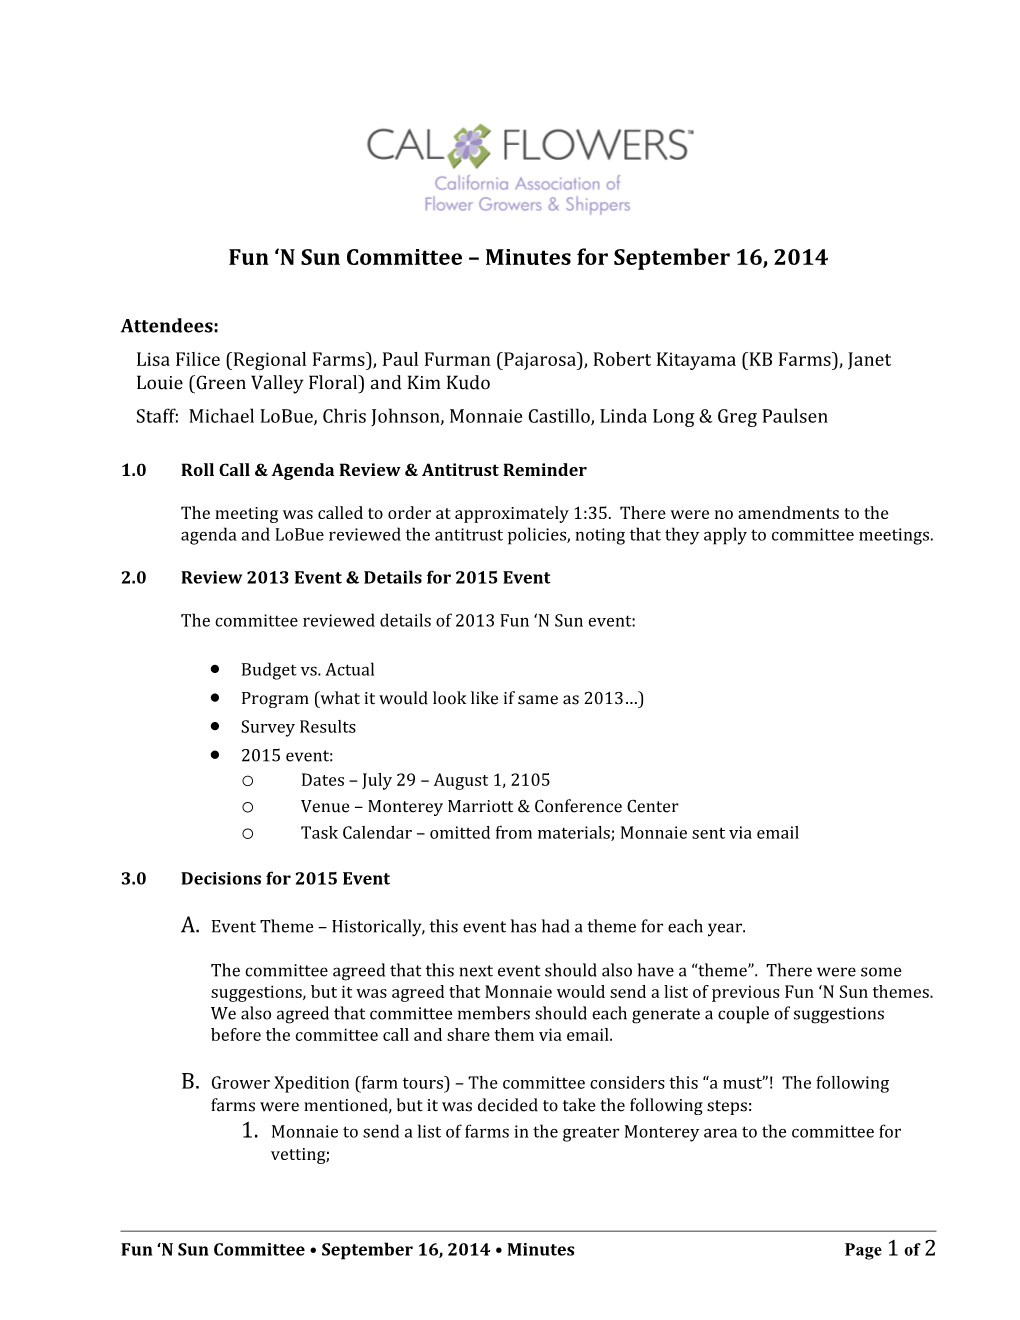 Fun N Sun Committee Minutes for September 16, 2014